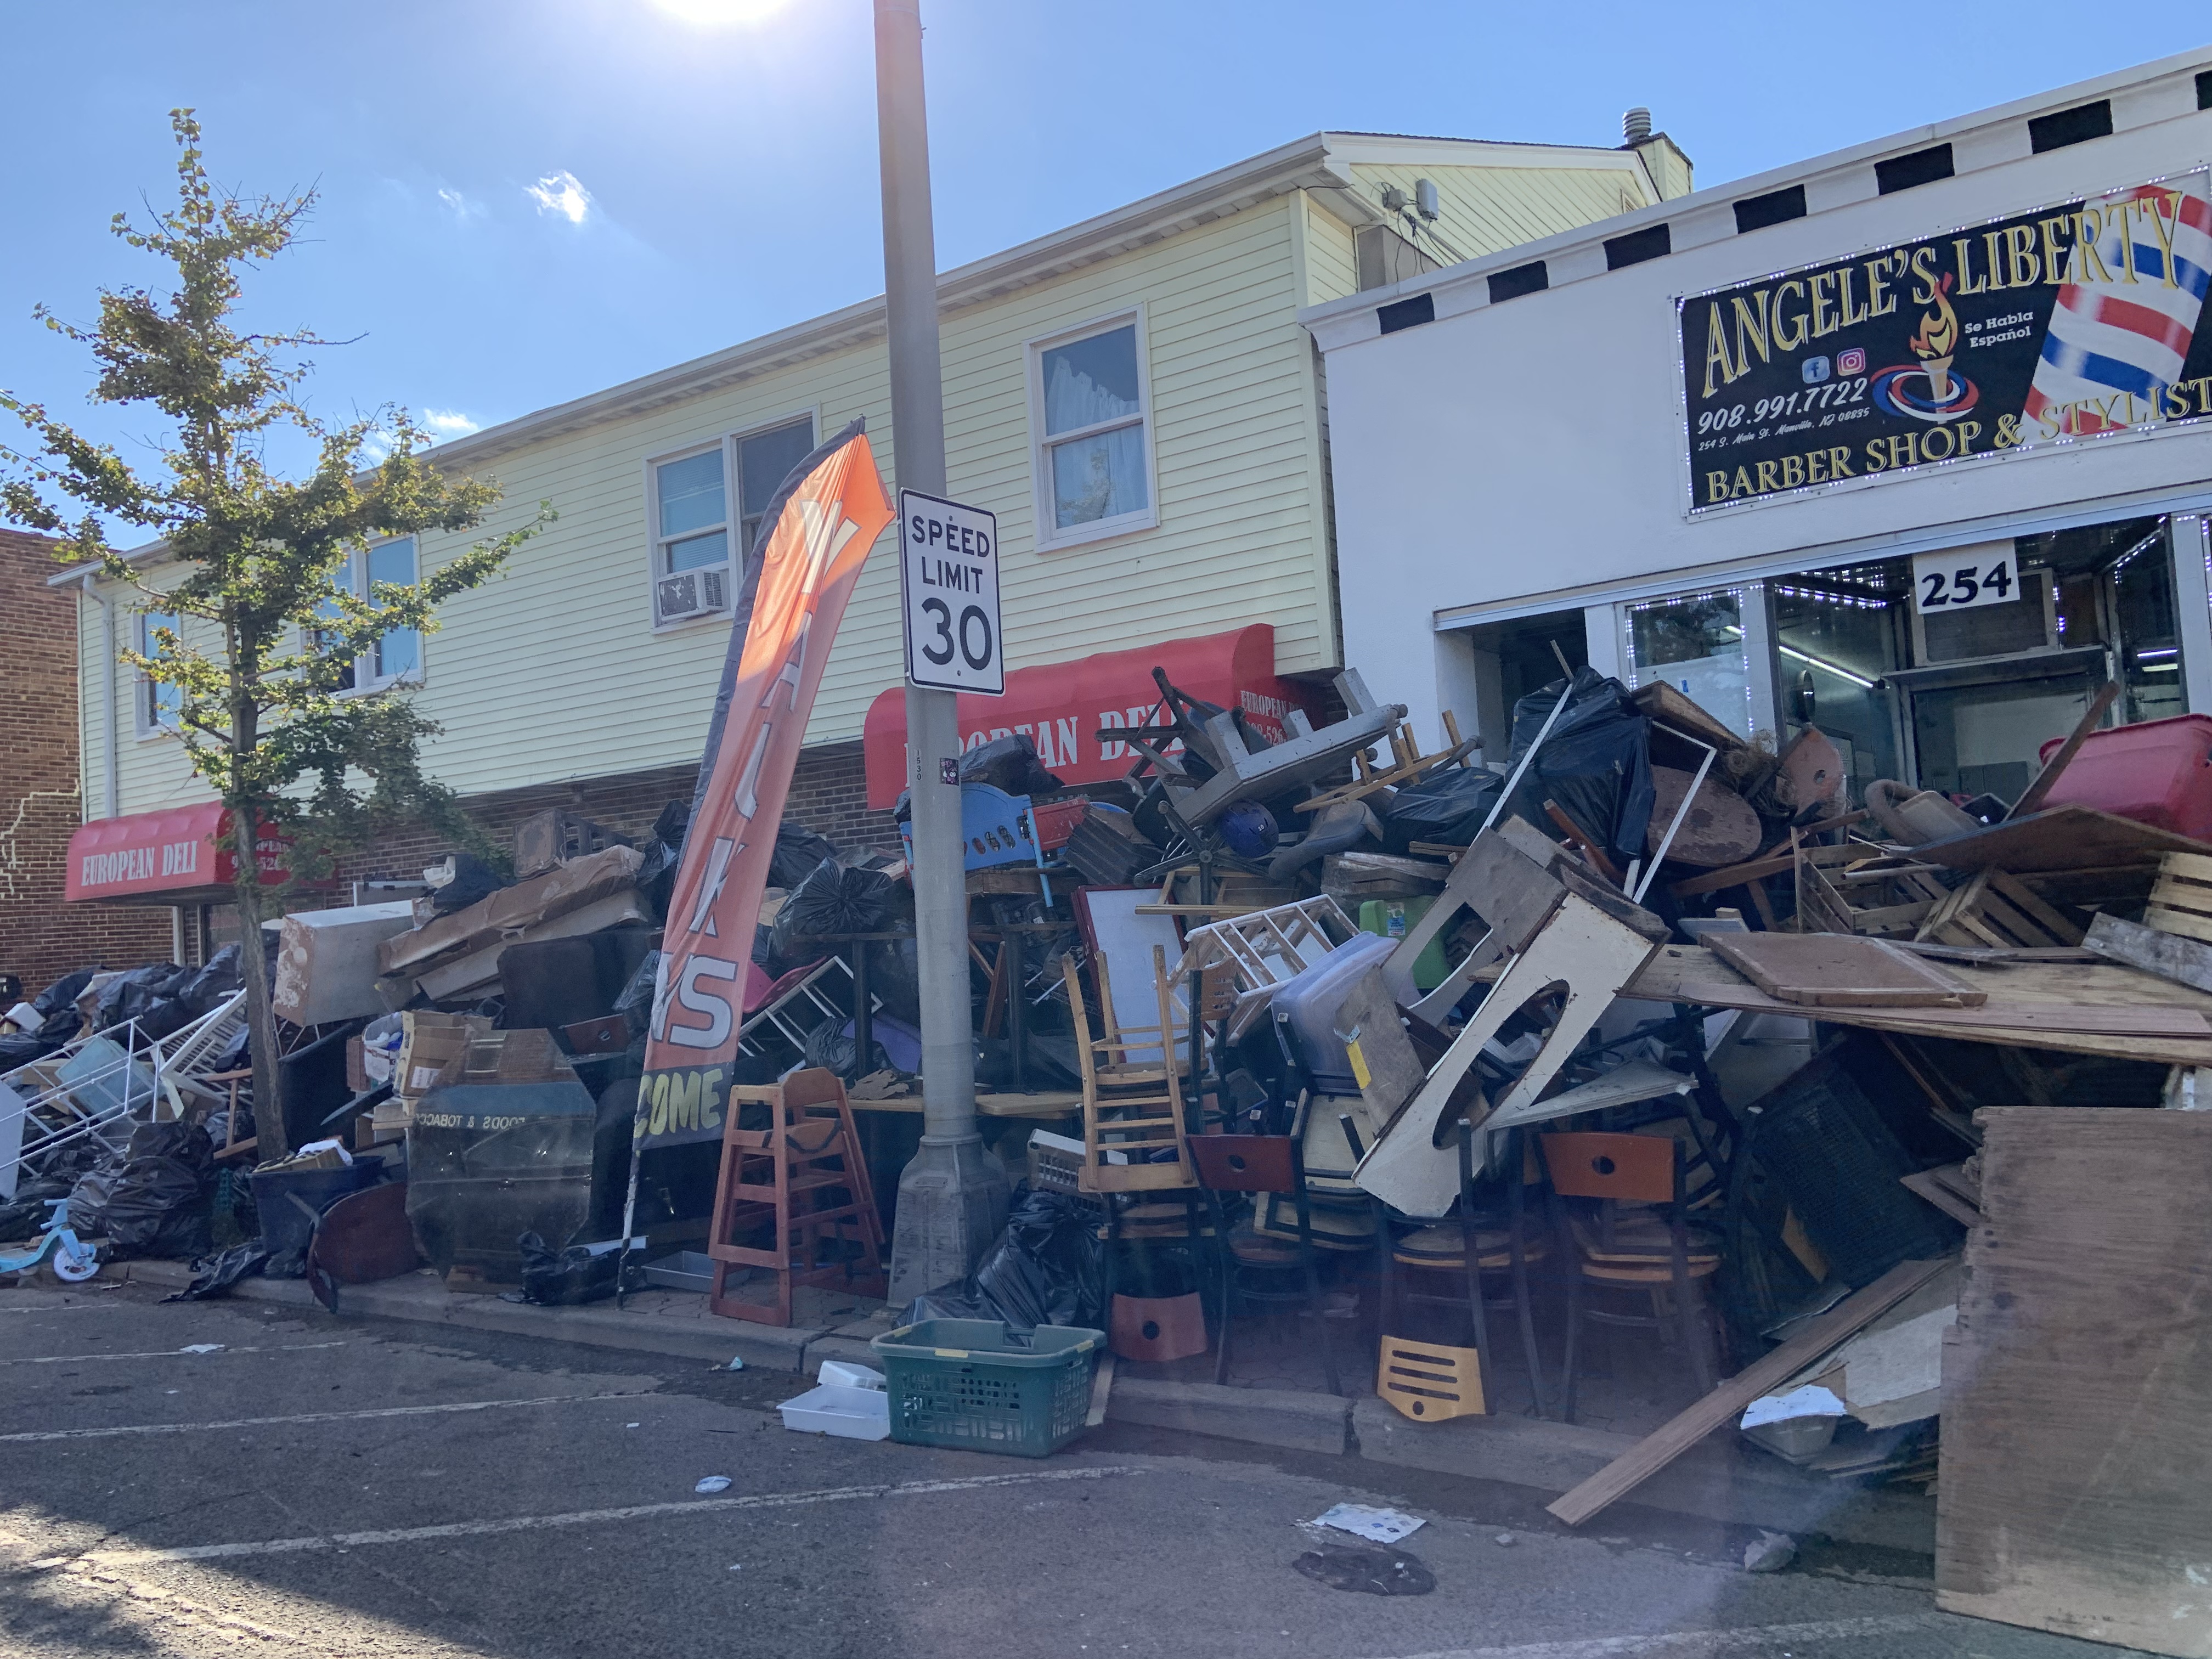 Photo of flood debris from business establishments on Main Street in Manville on September 7 (photo credit: M. Holzer).